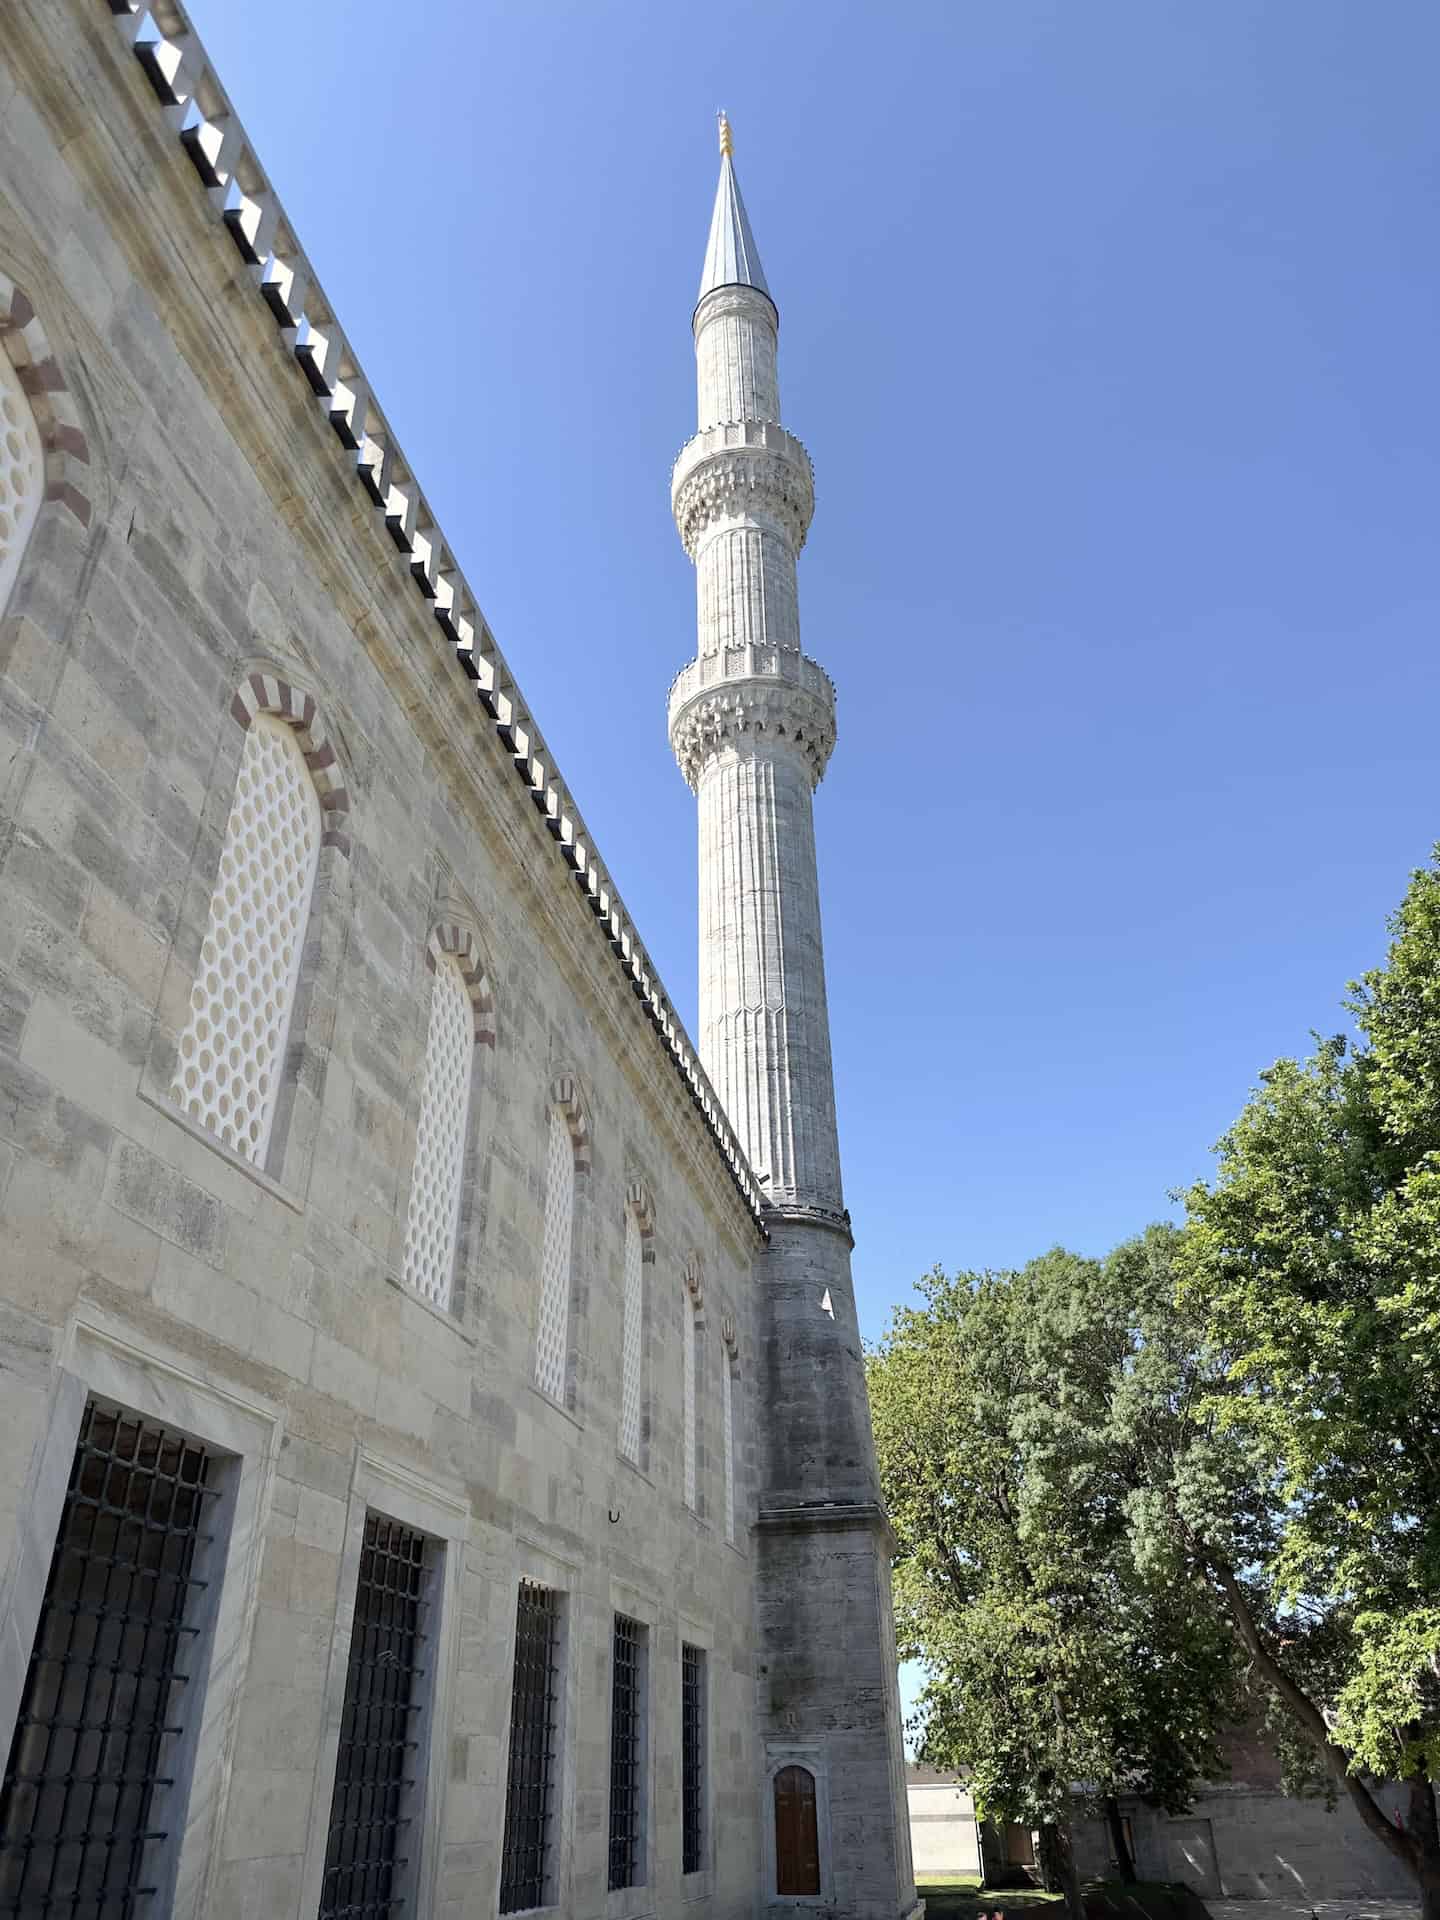 One of the six minarets of the Blue Mosque in Istanbul, Turkey